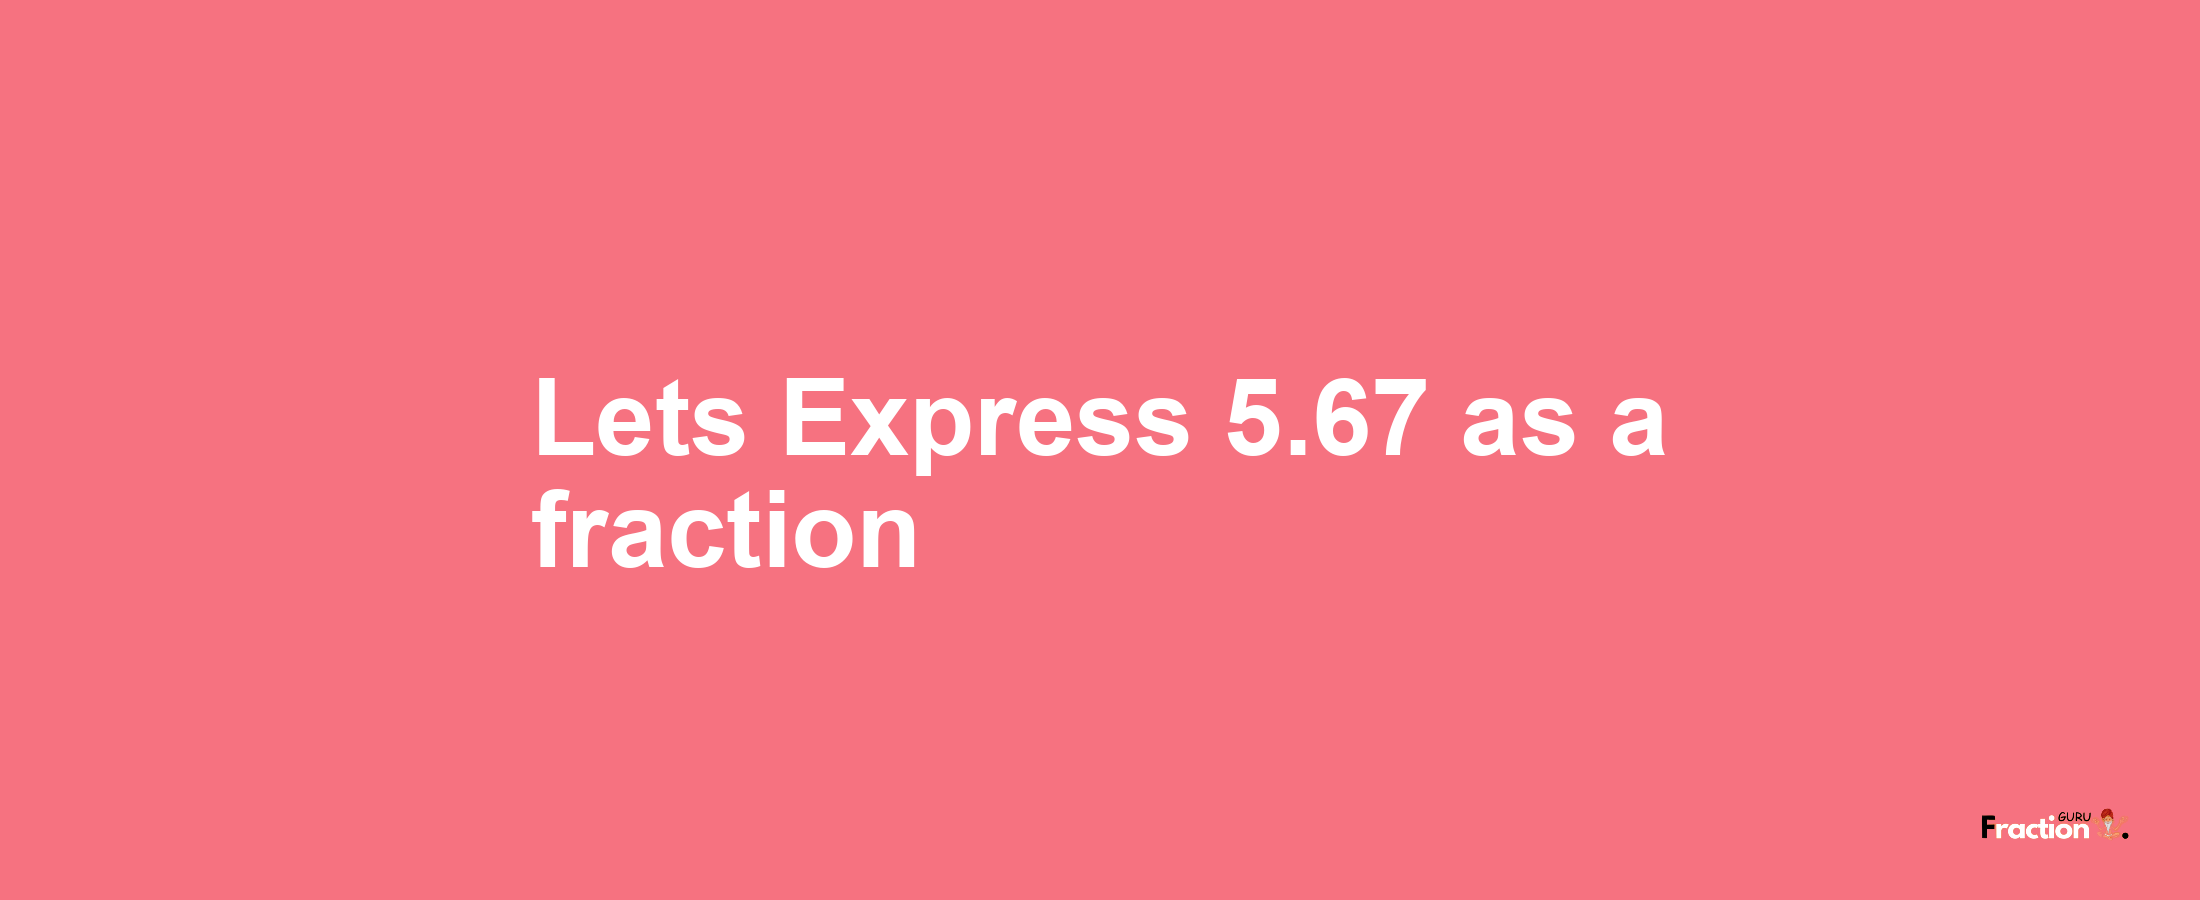 Lets Express 5.67 as afraction